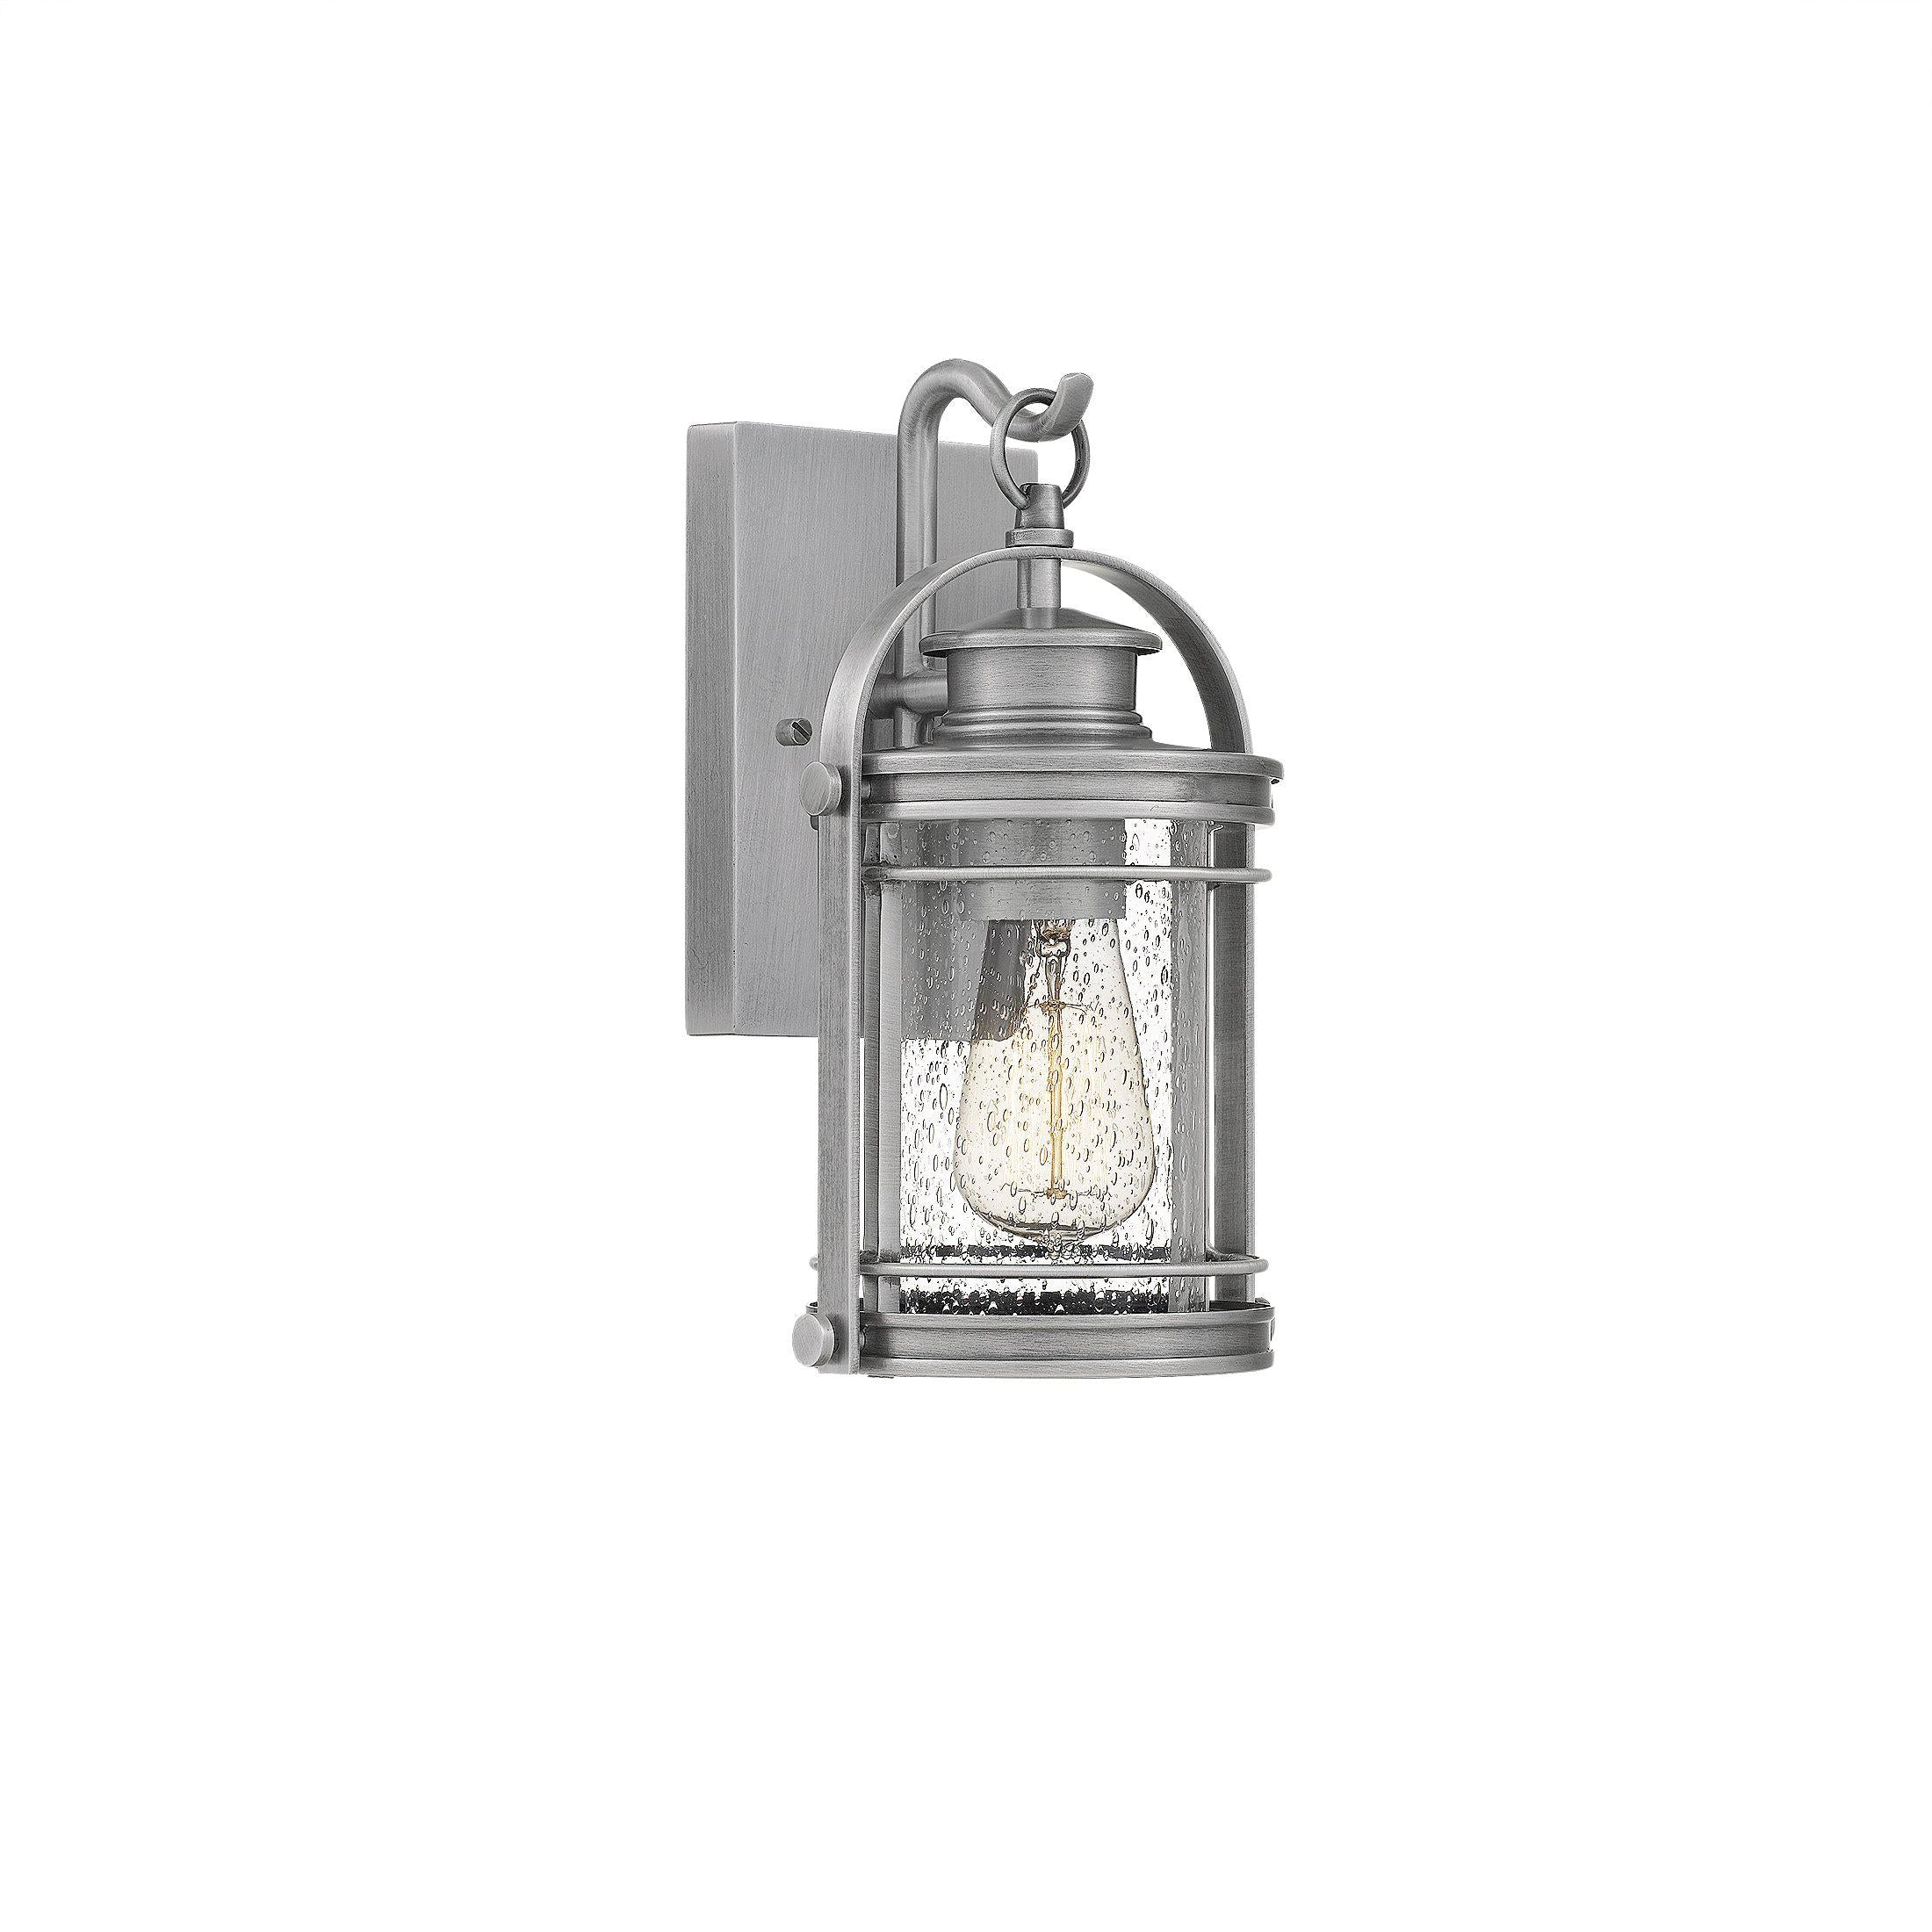 Quoizel  Booker Outdoor Lantern, Small Outdoor l Wall Quoizel   